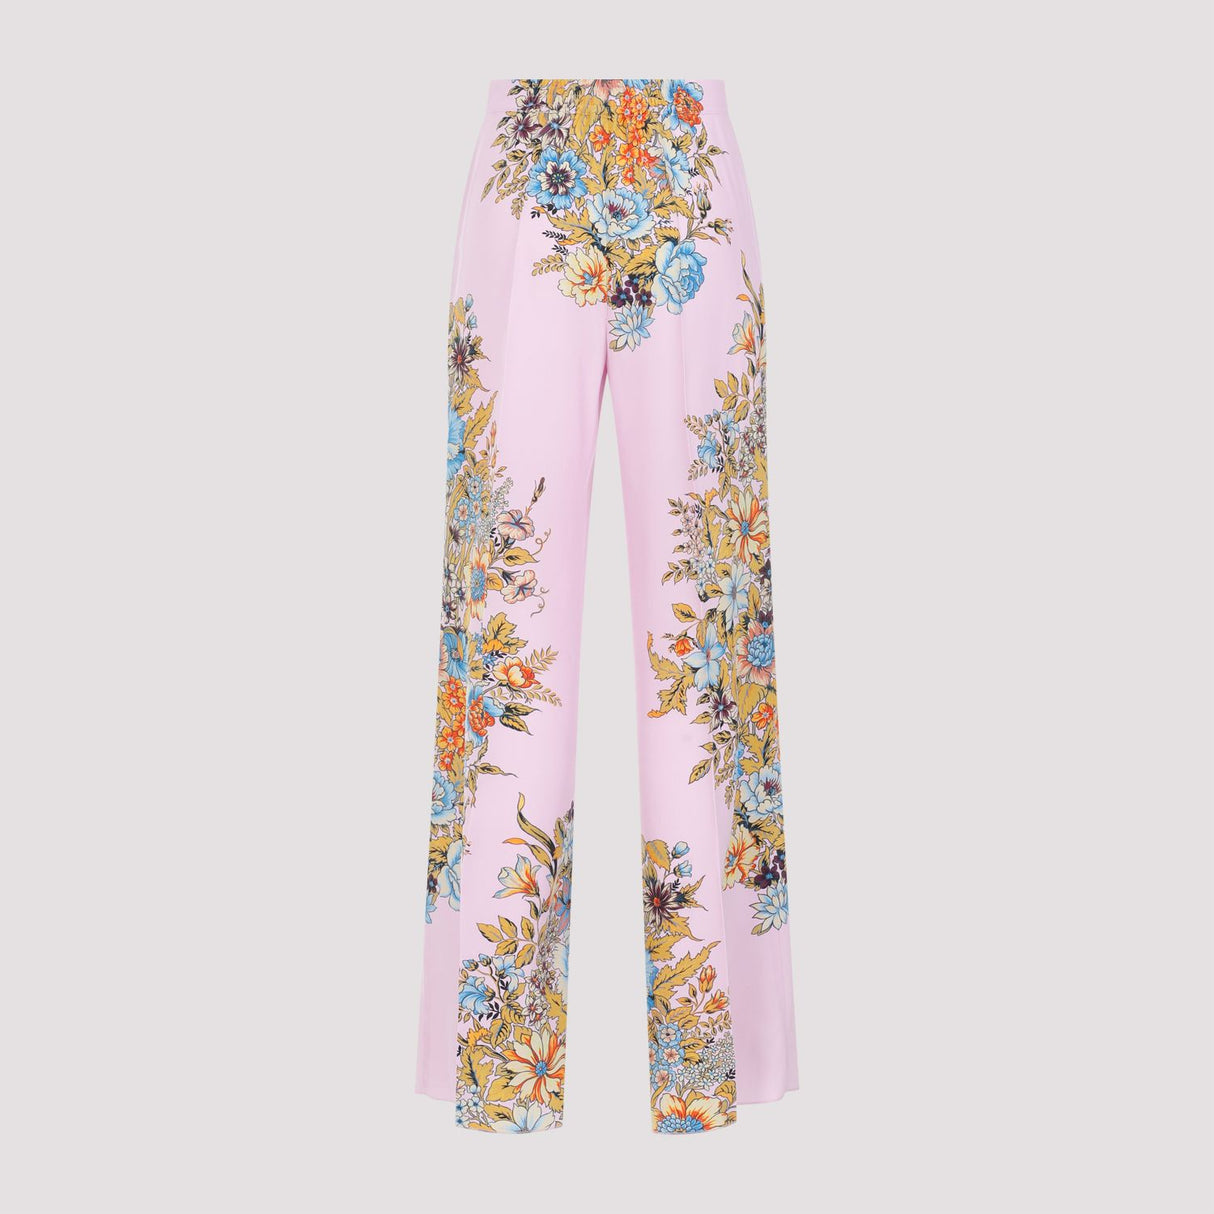 ETRO Luxurious Silk Pants in Pretty Pink and Purple for Women